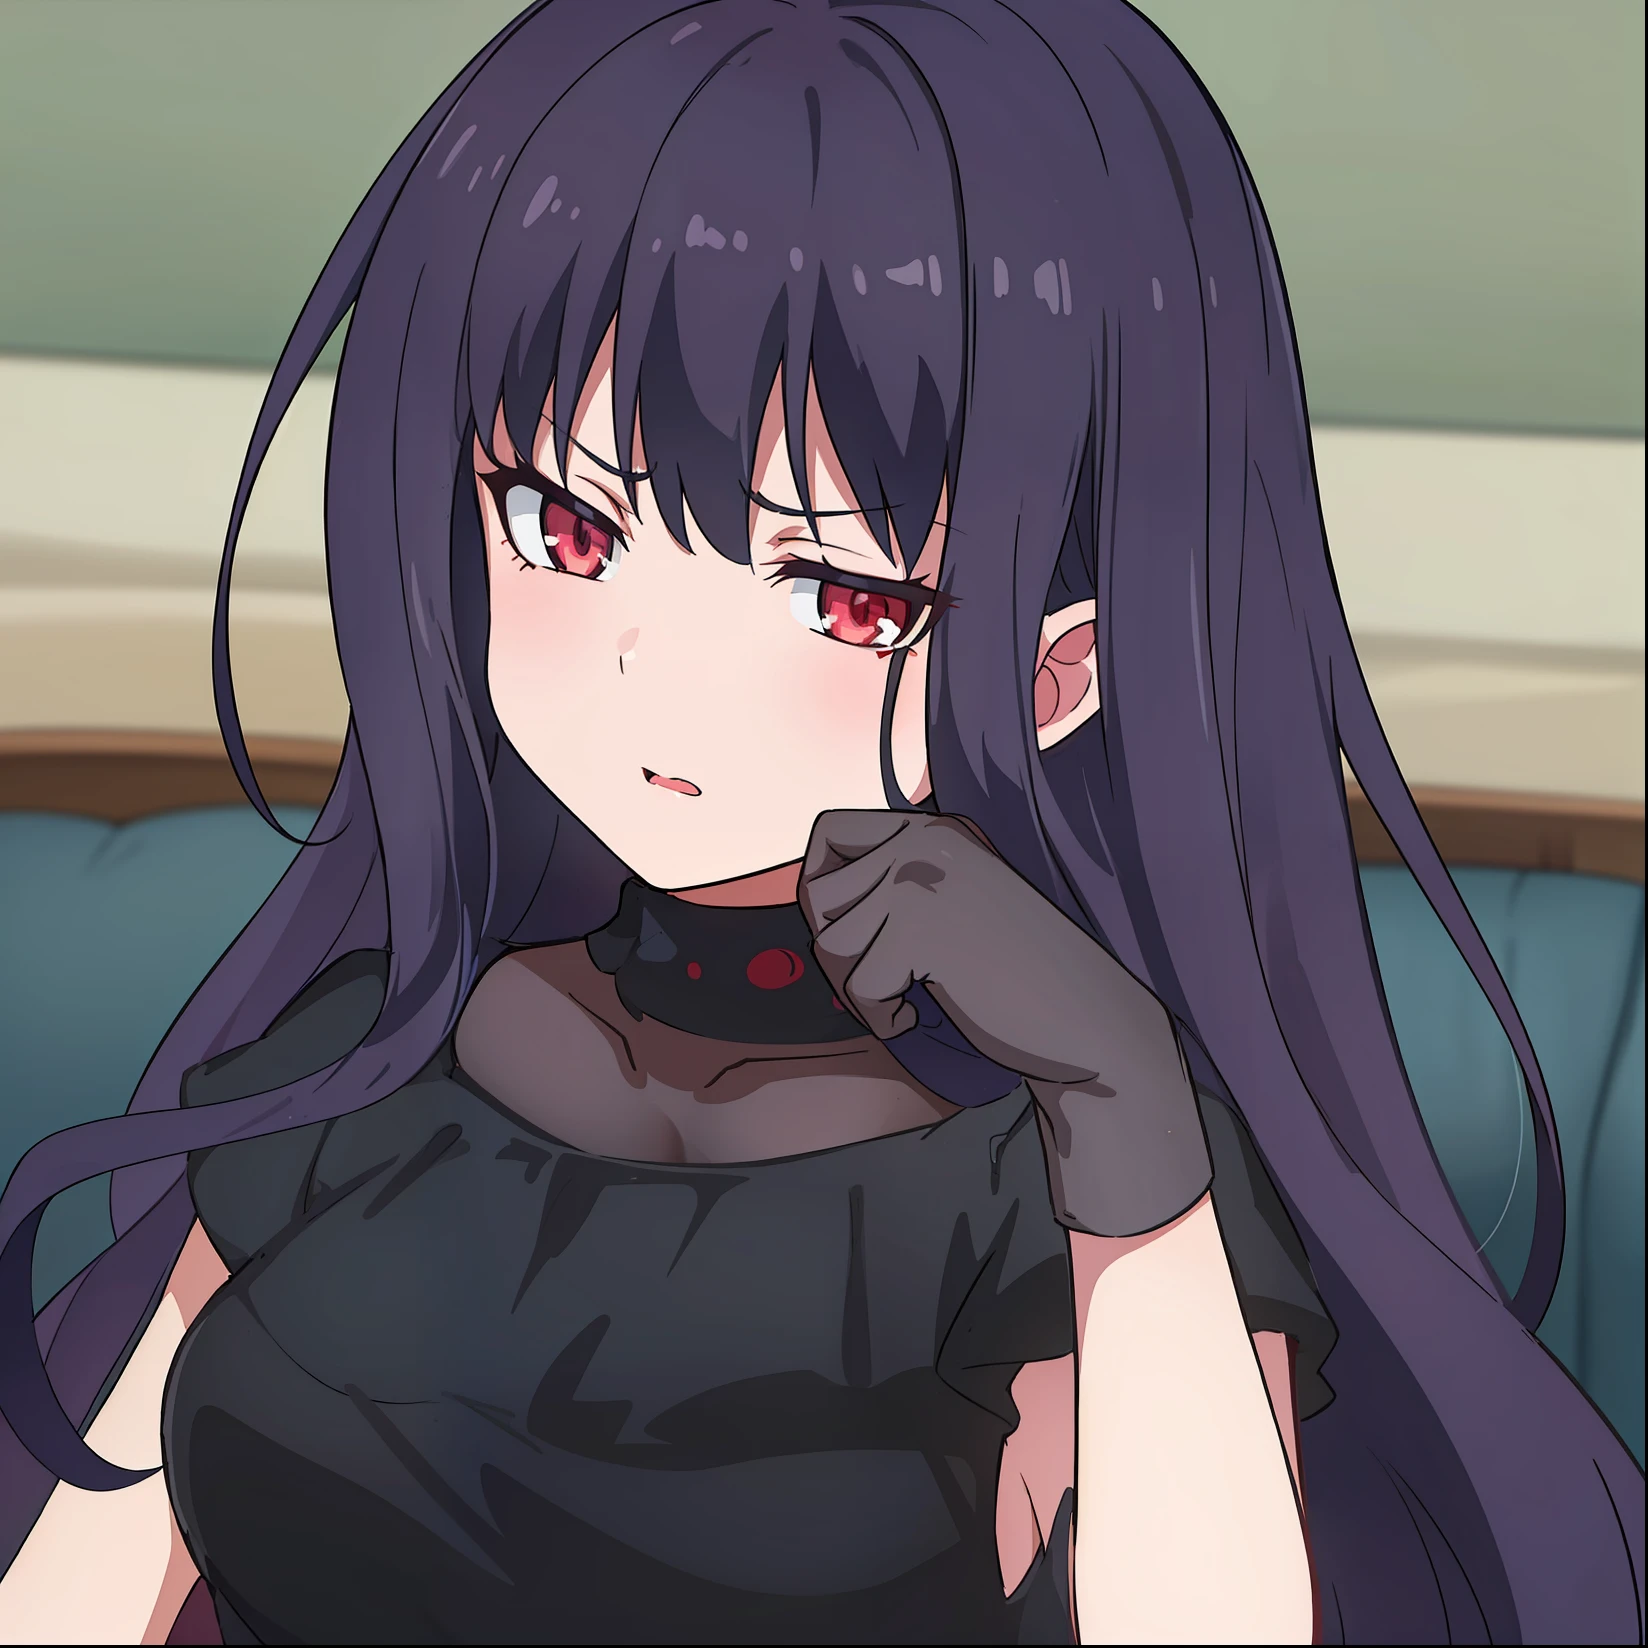 A  girl.  dark colored hair. red-eyes. Dark outfit. frowning face. round open mouth. gray bags under the eyes. A hand in a dark glove near the cheek